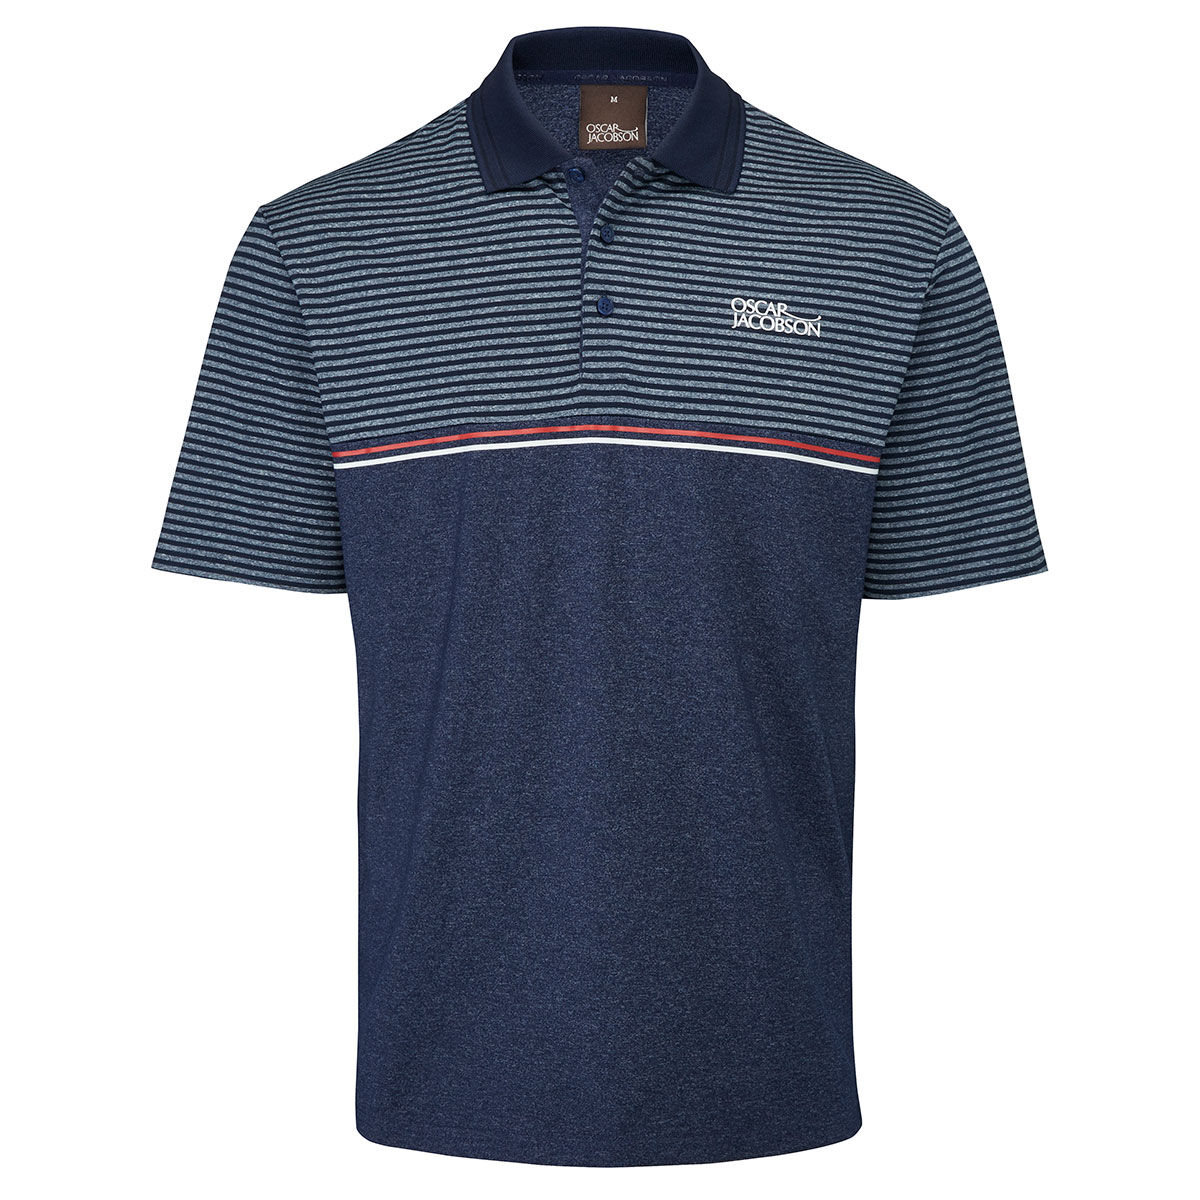 Oscar Jacobson Mens Navy Blue, White and Red Lightweight Stripe Whitby Golf Polo Shirt, Size: Small | American Golf